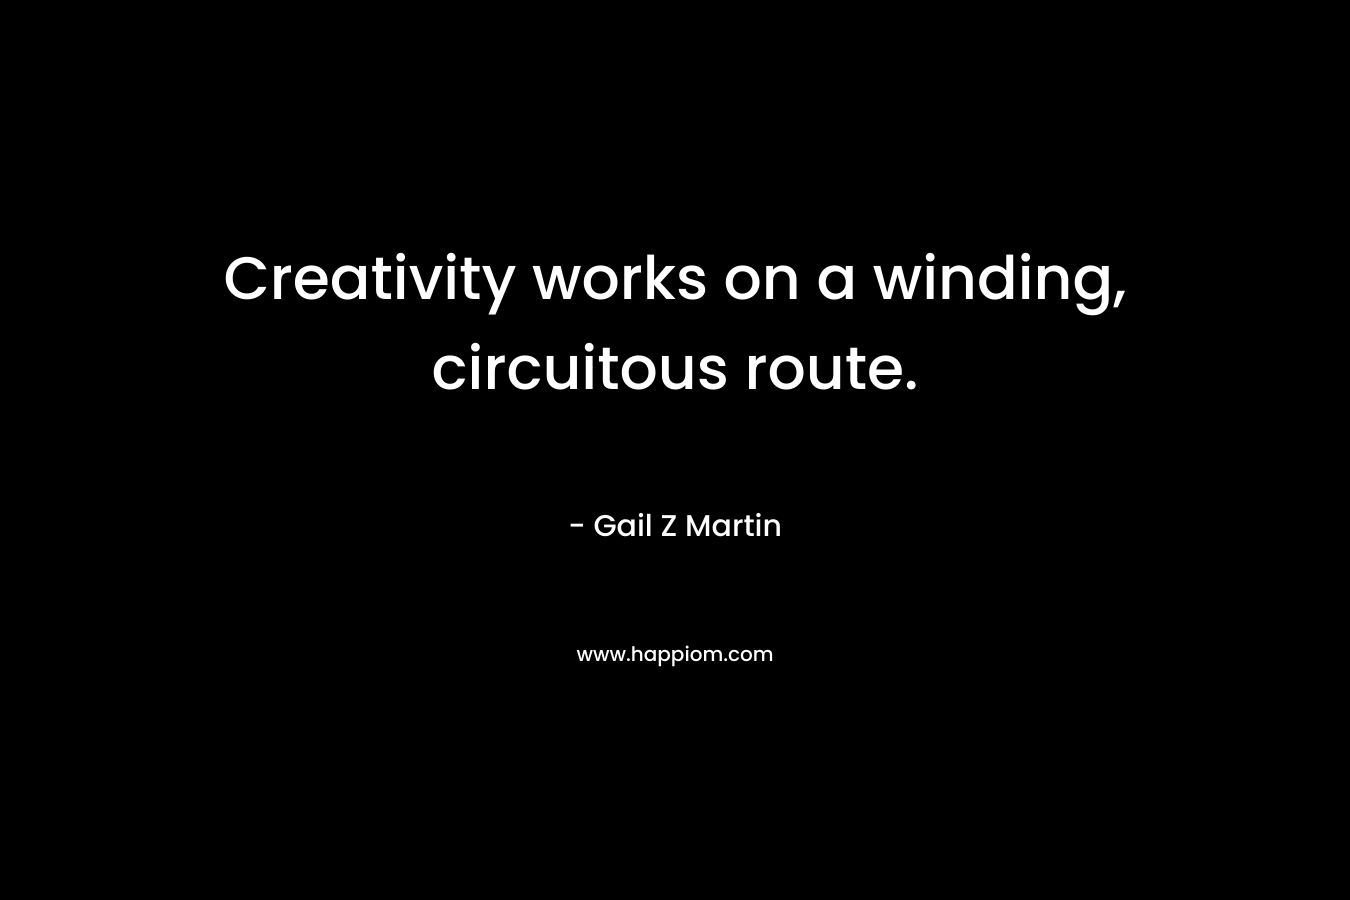 Creativity works on a winding, circuitous route. – Gail Z Martin